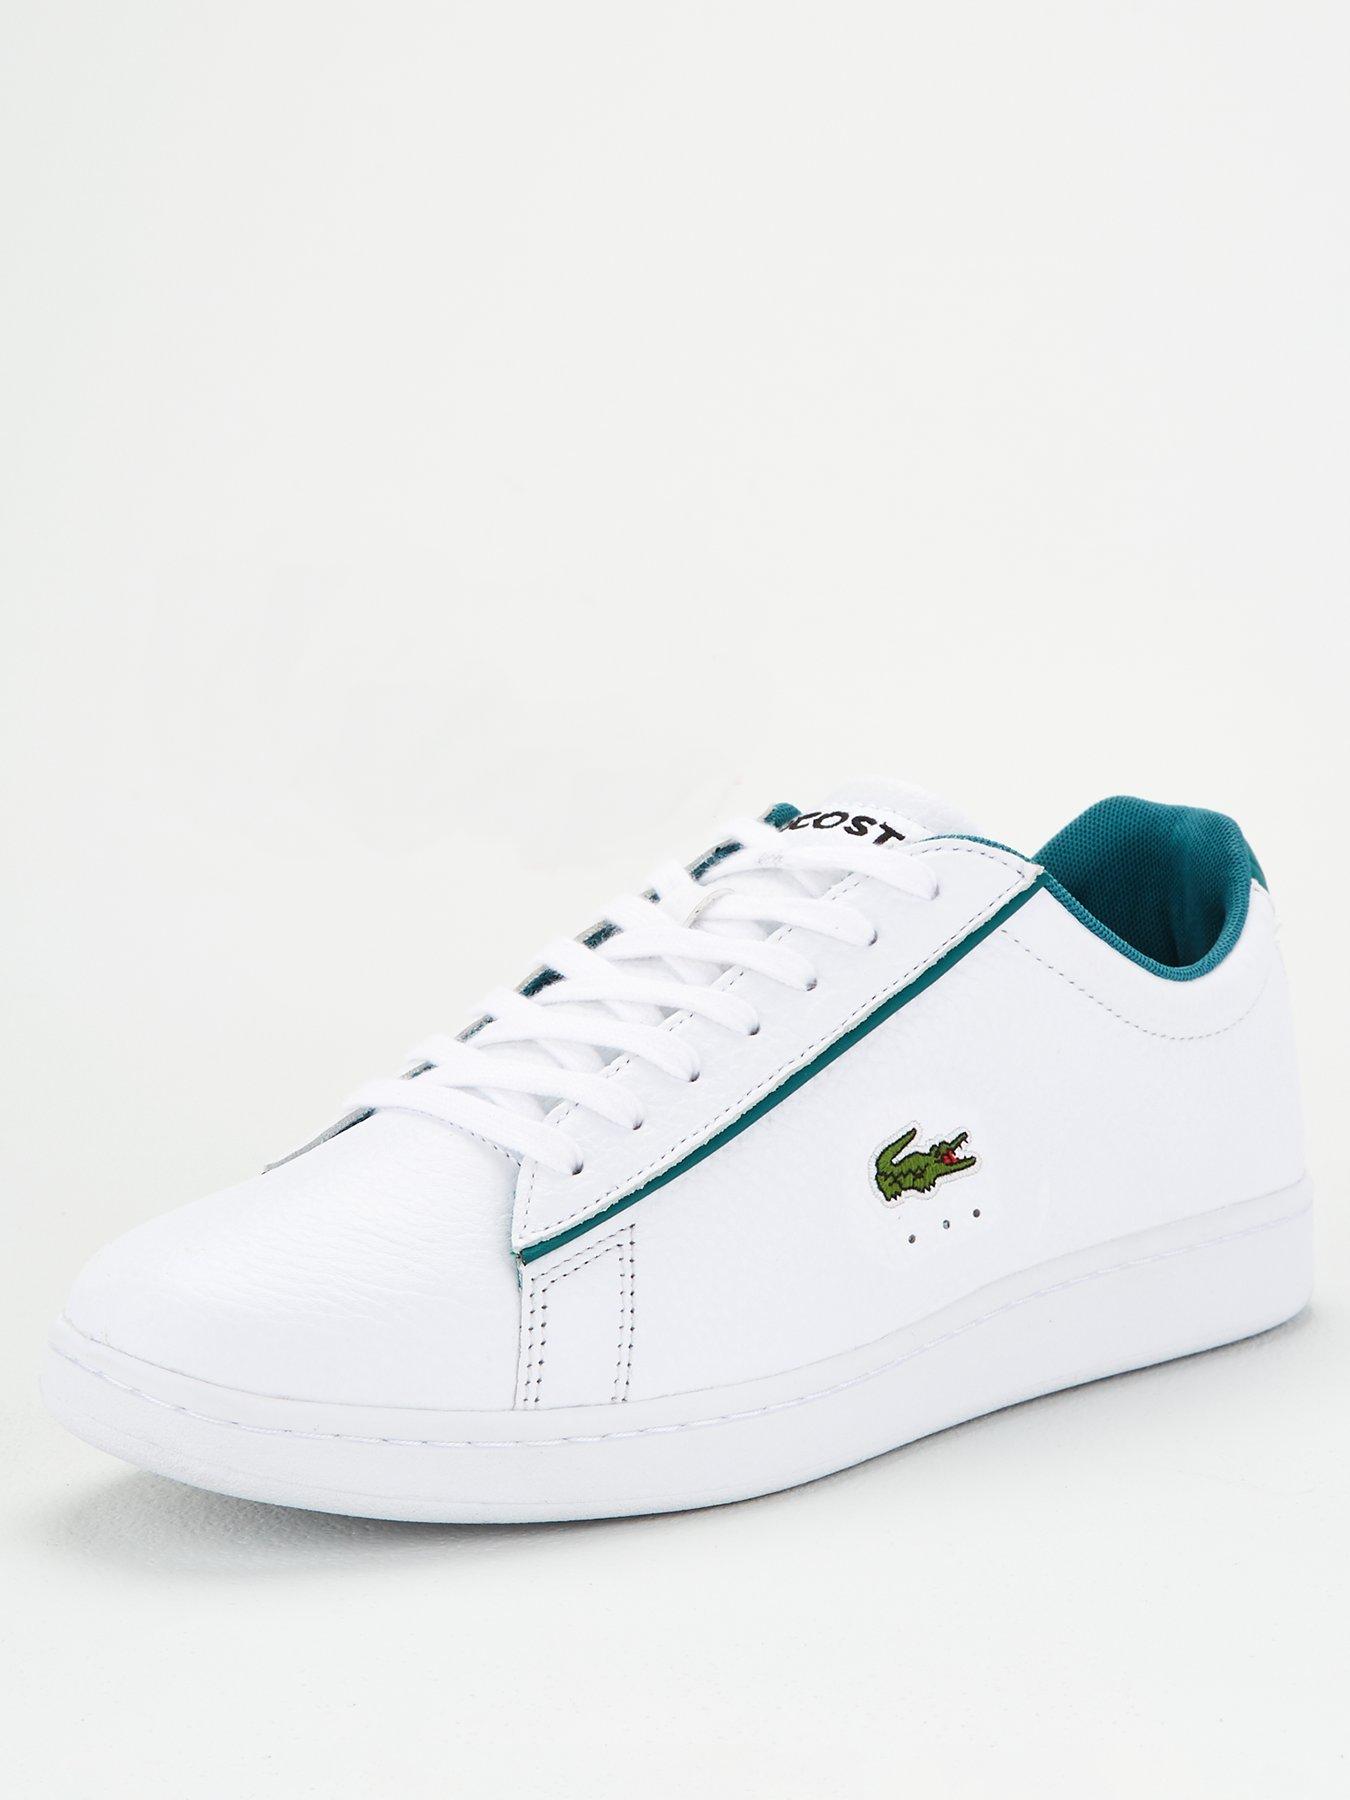 women's carnaby evo tricolore leather trainers